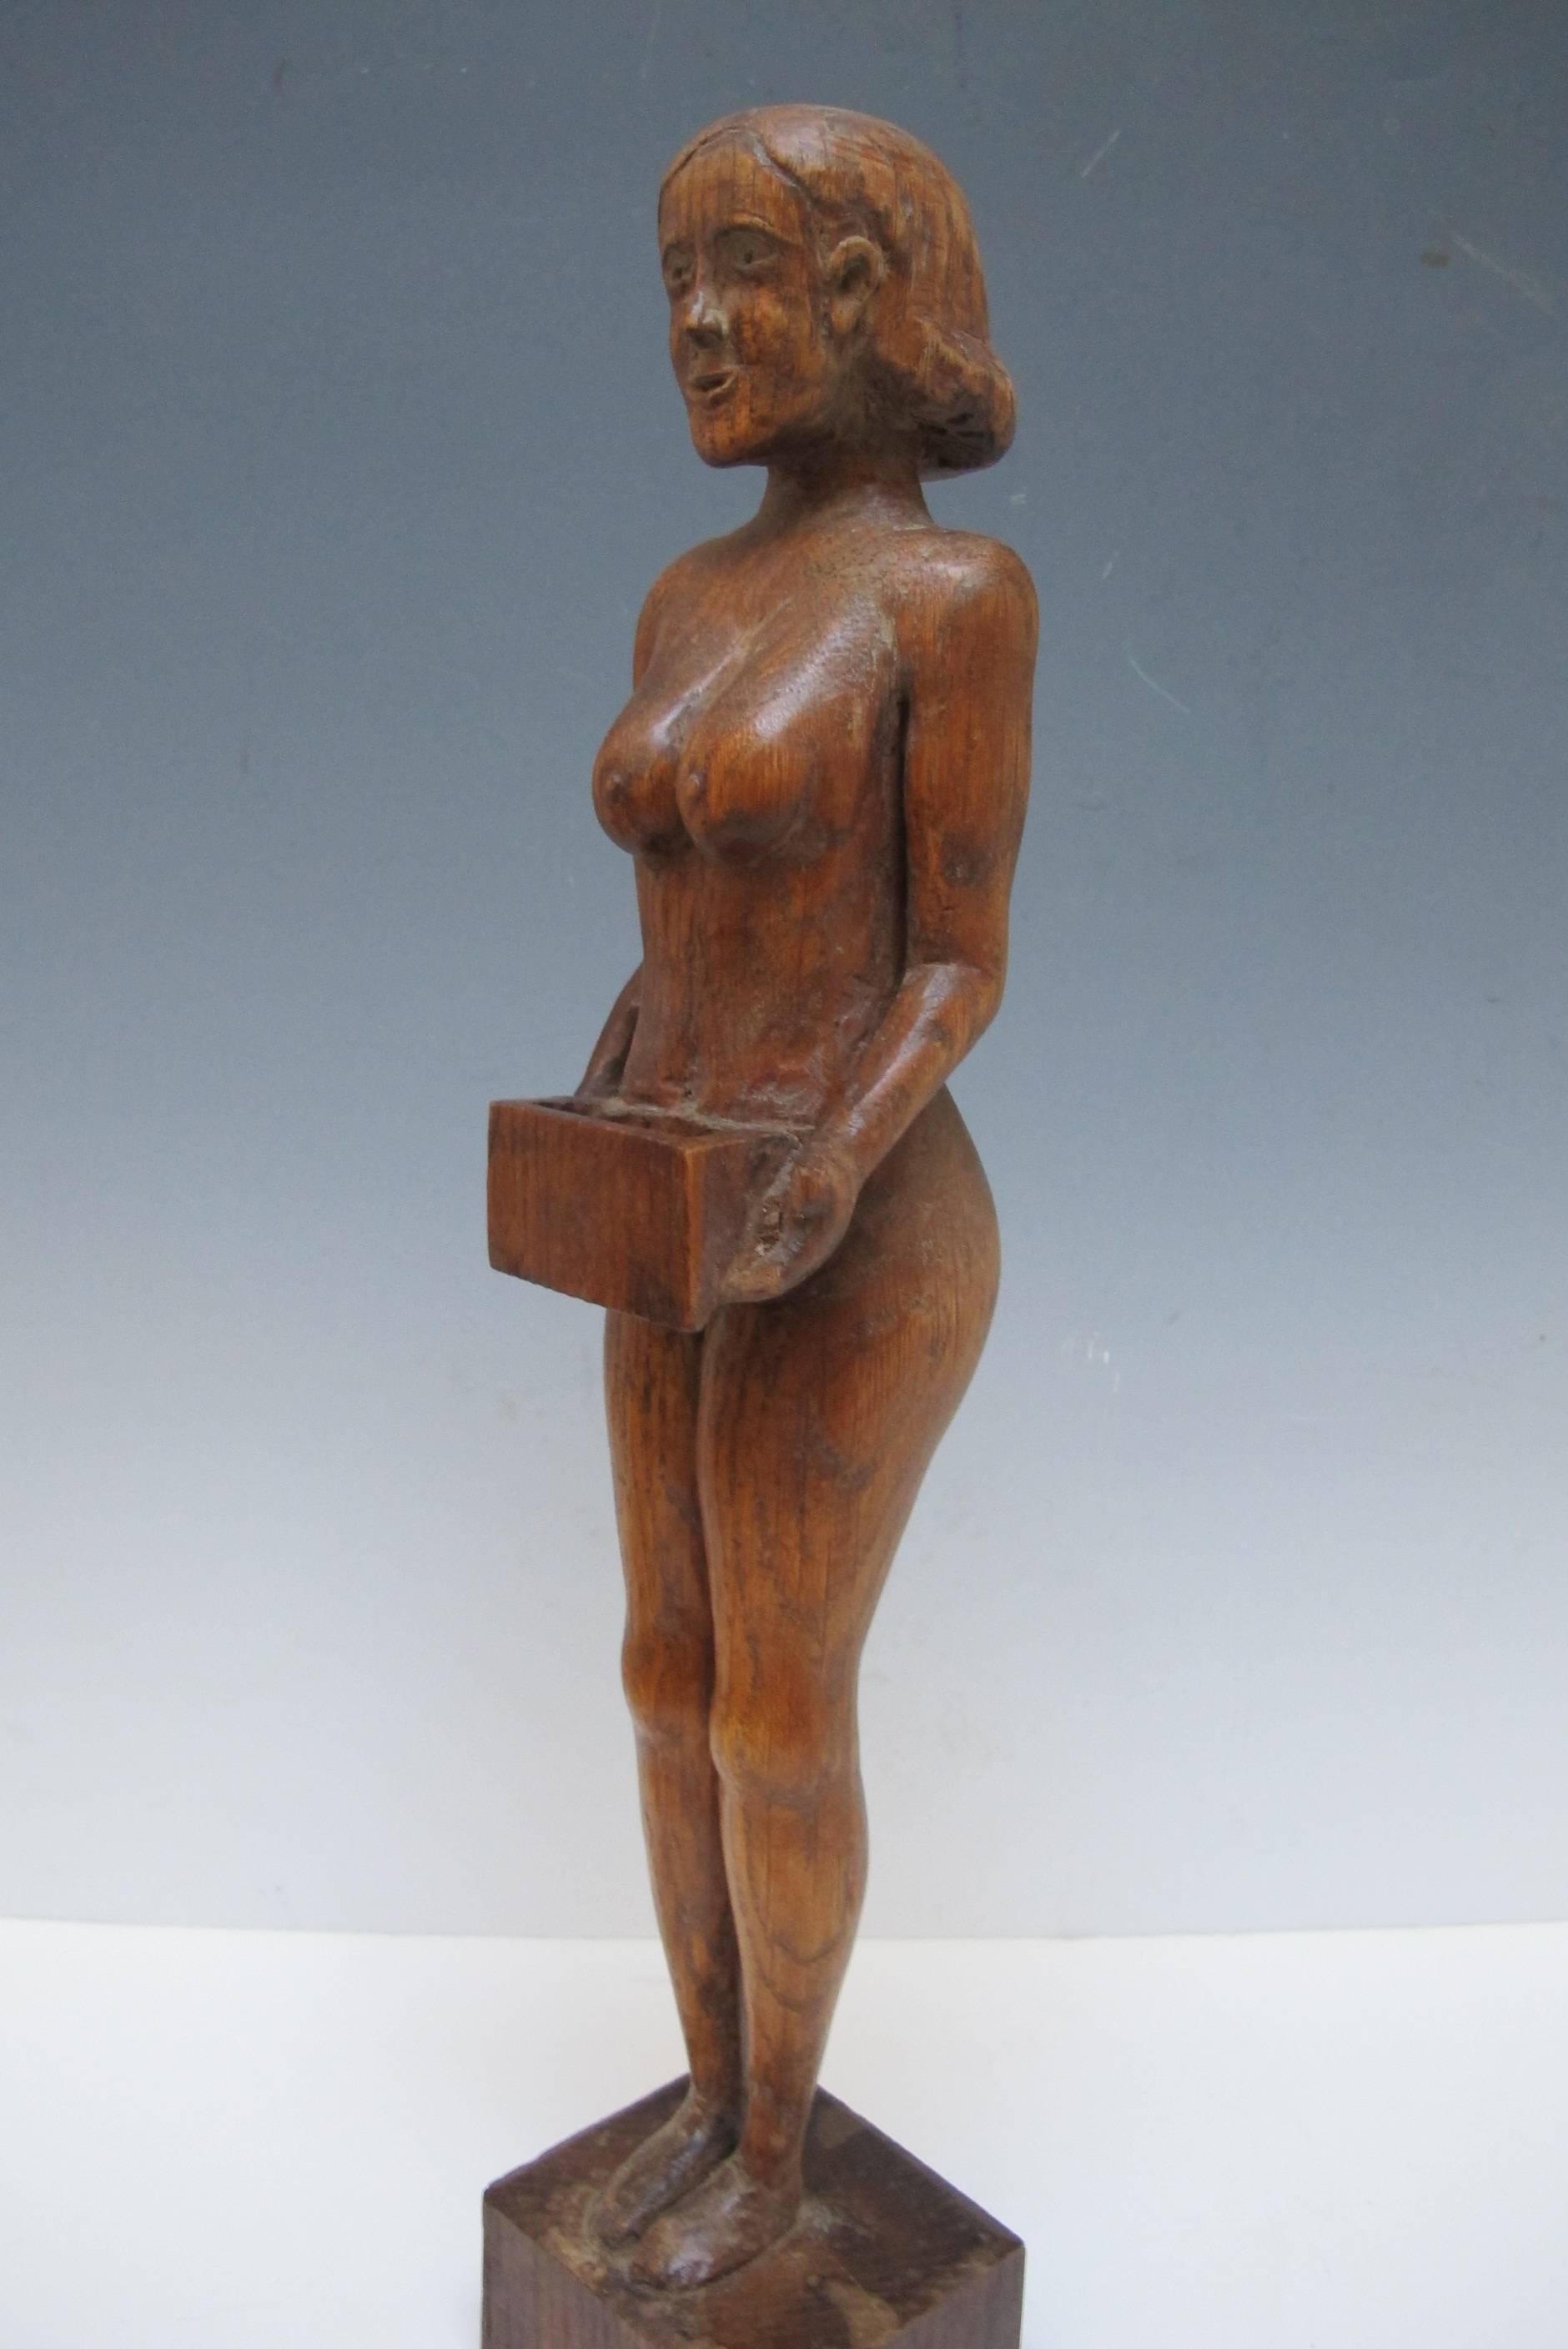 Carved oak female figure holding a box waist high large enough for wooden matches. The carver had a liking and appreciation for the female figure and skill in carving it from a single block of wood.